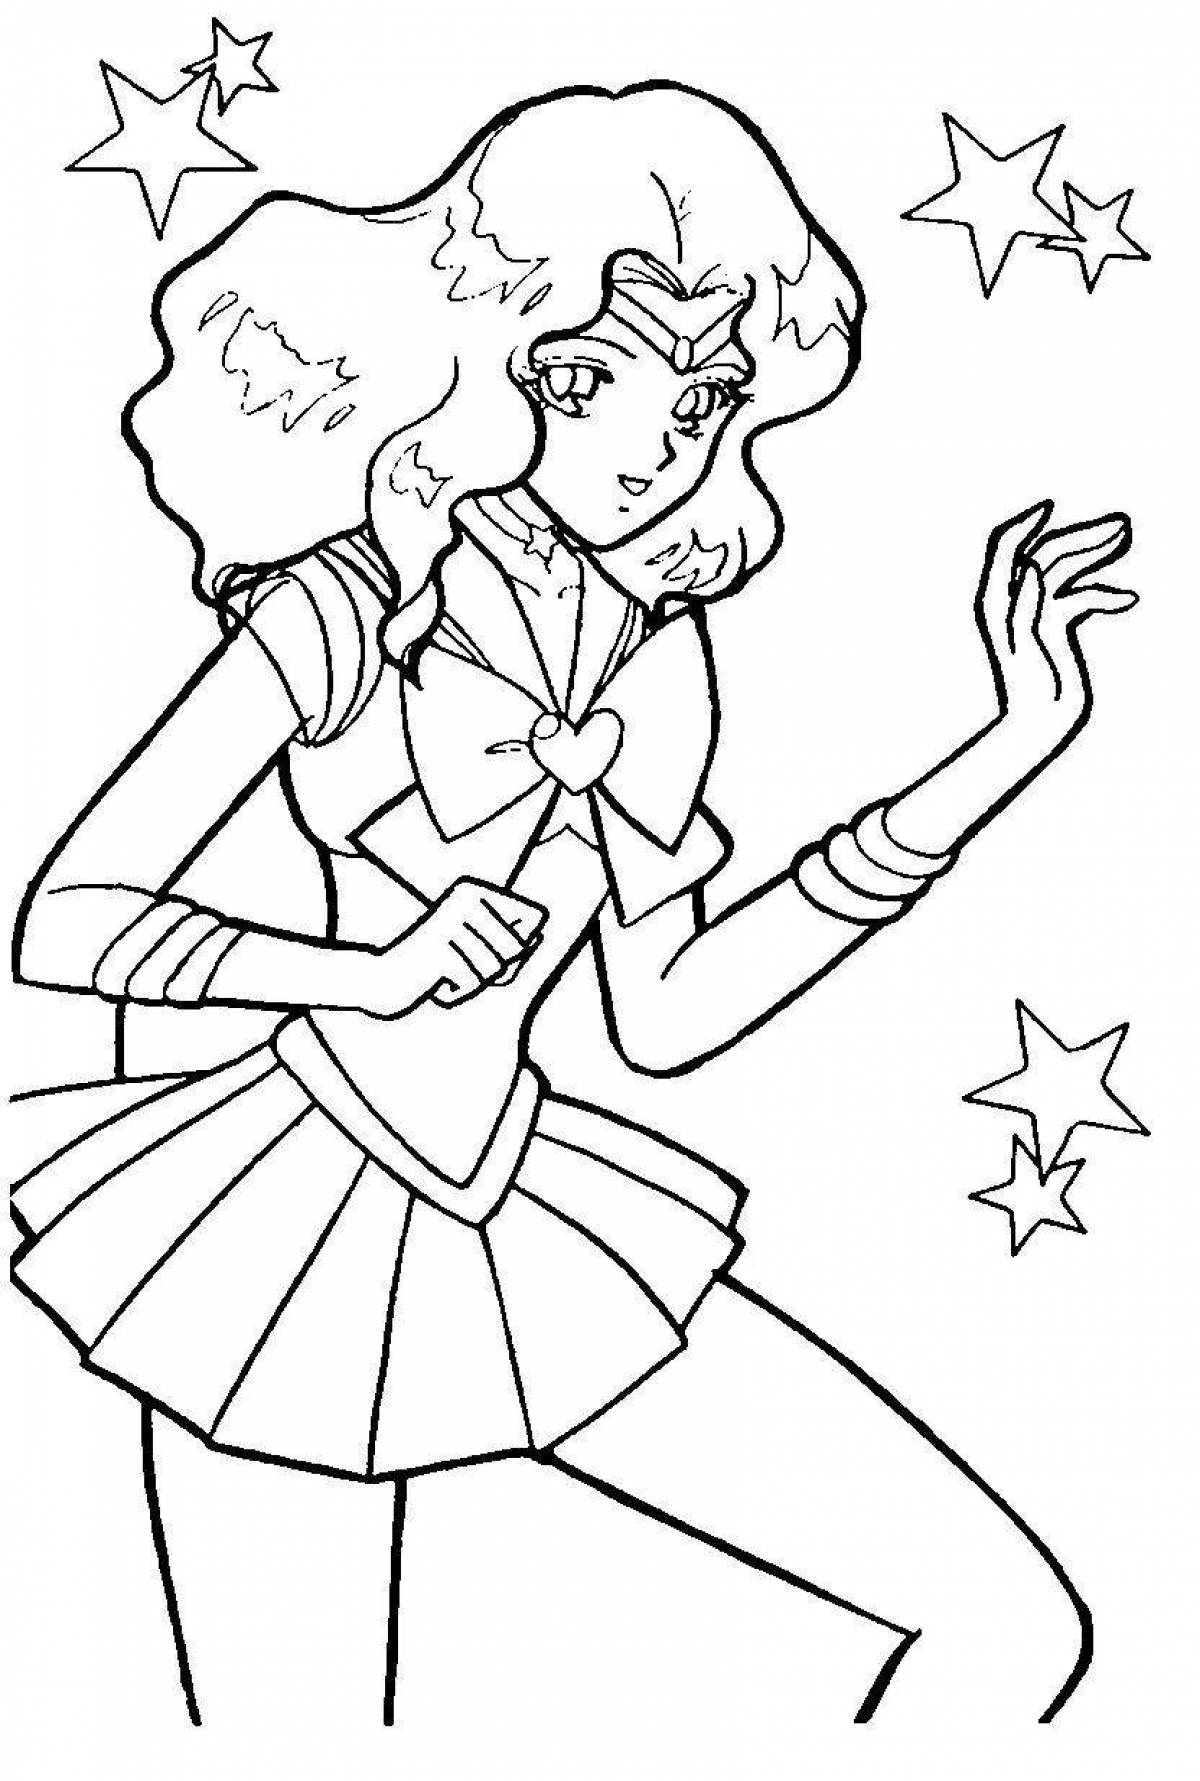 Blessed Sailor Neptune coloring book